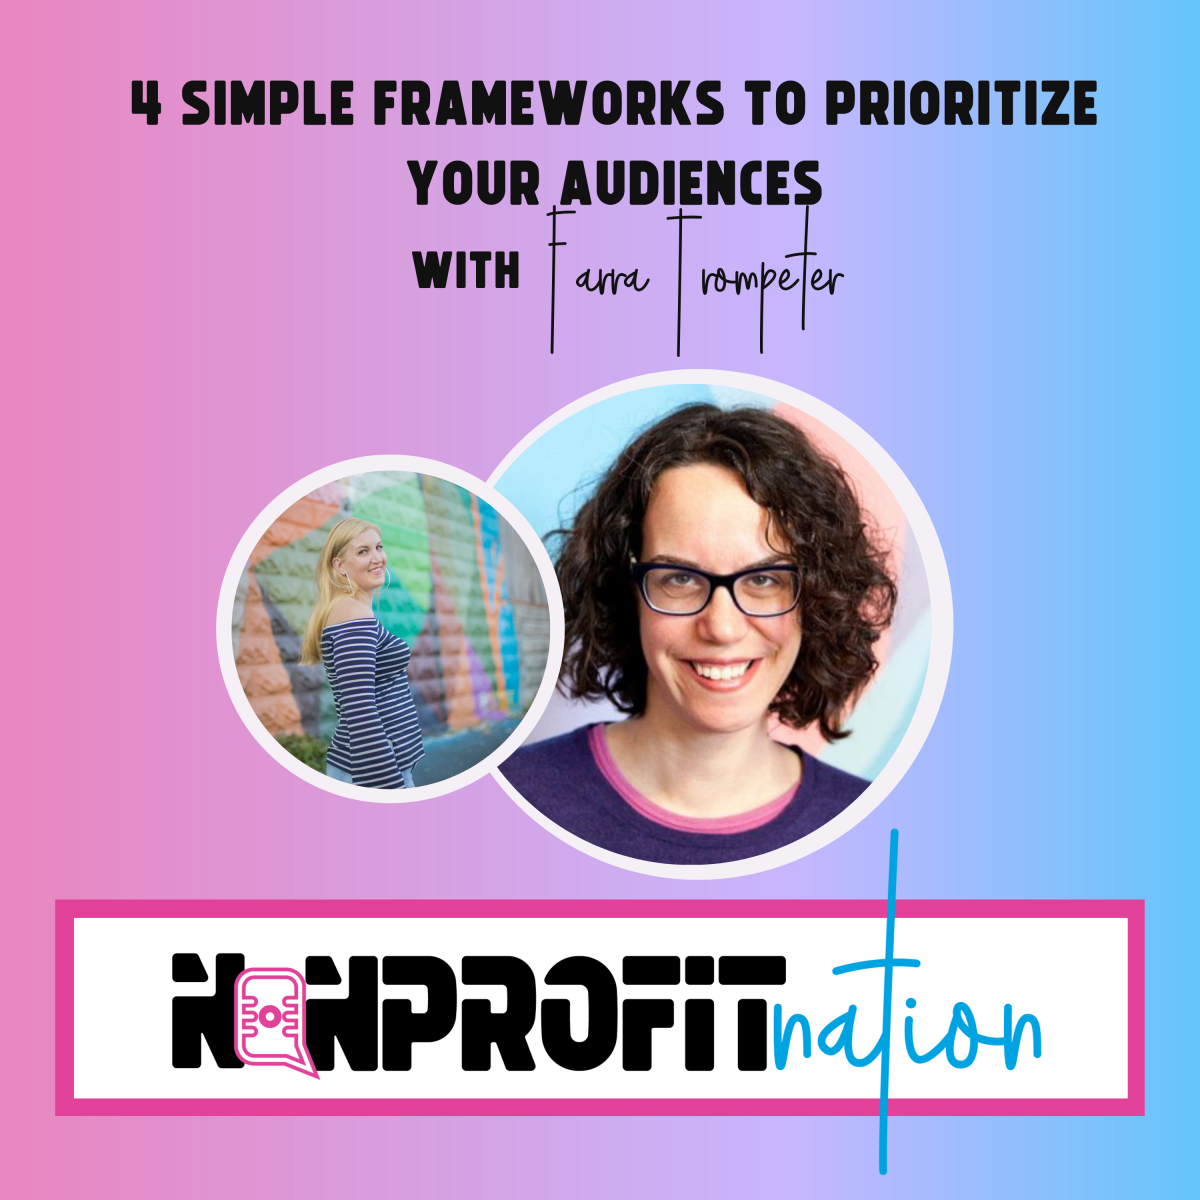 4 Simple Frameworks to Prioritize Your Audiences with Farra Trompeter